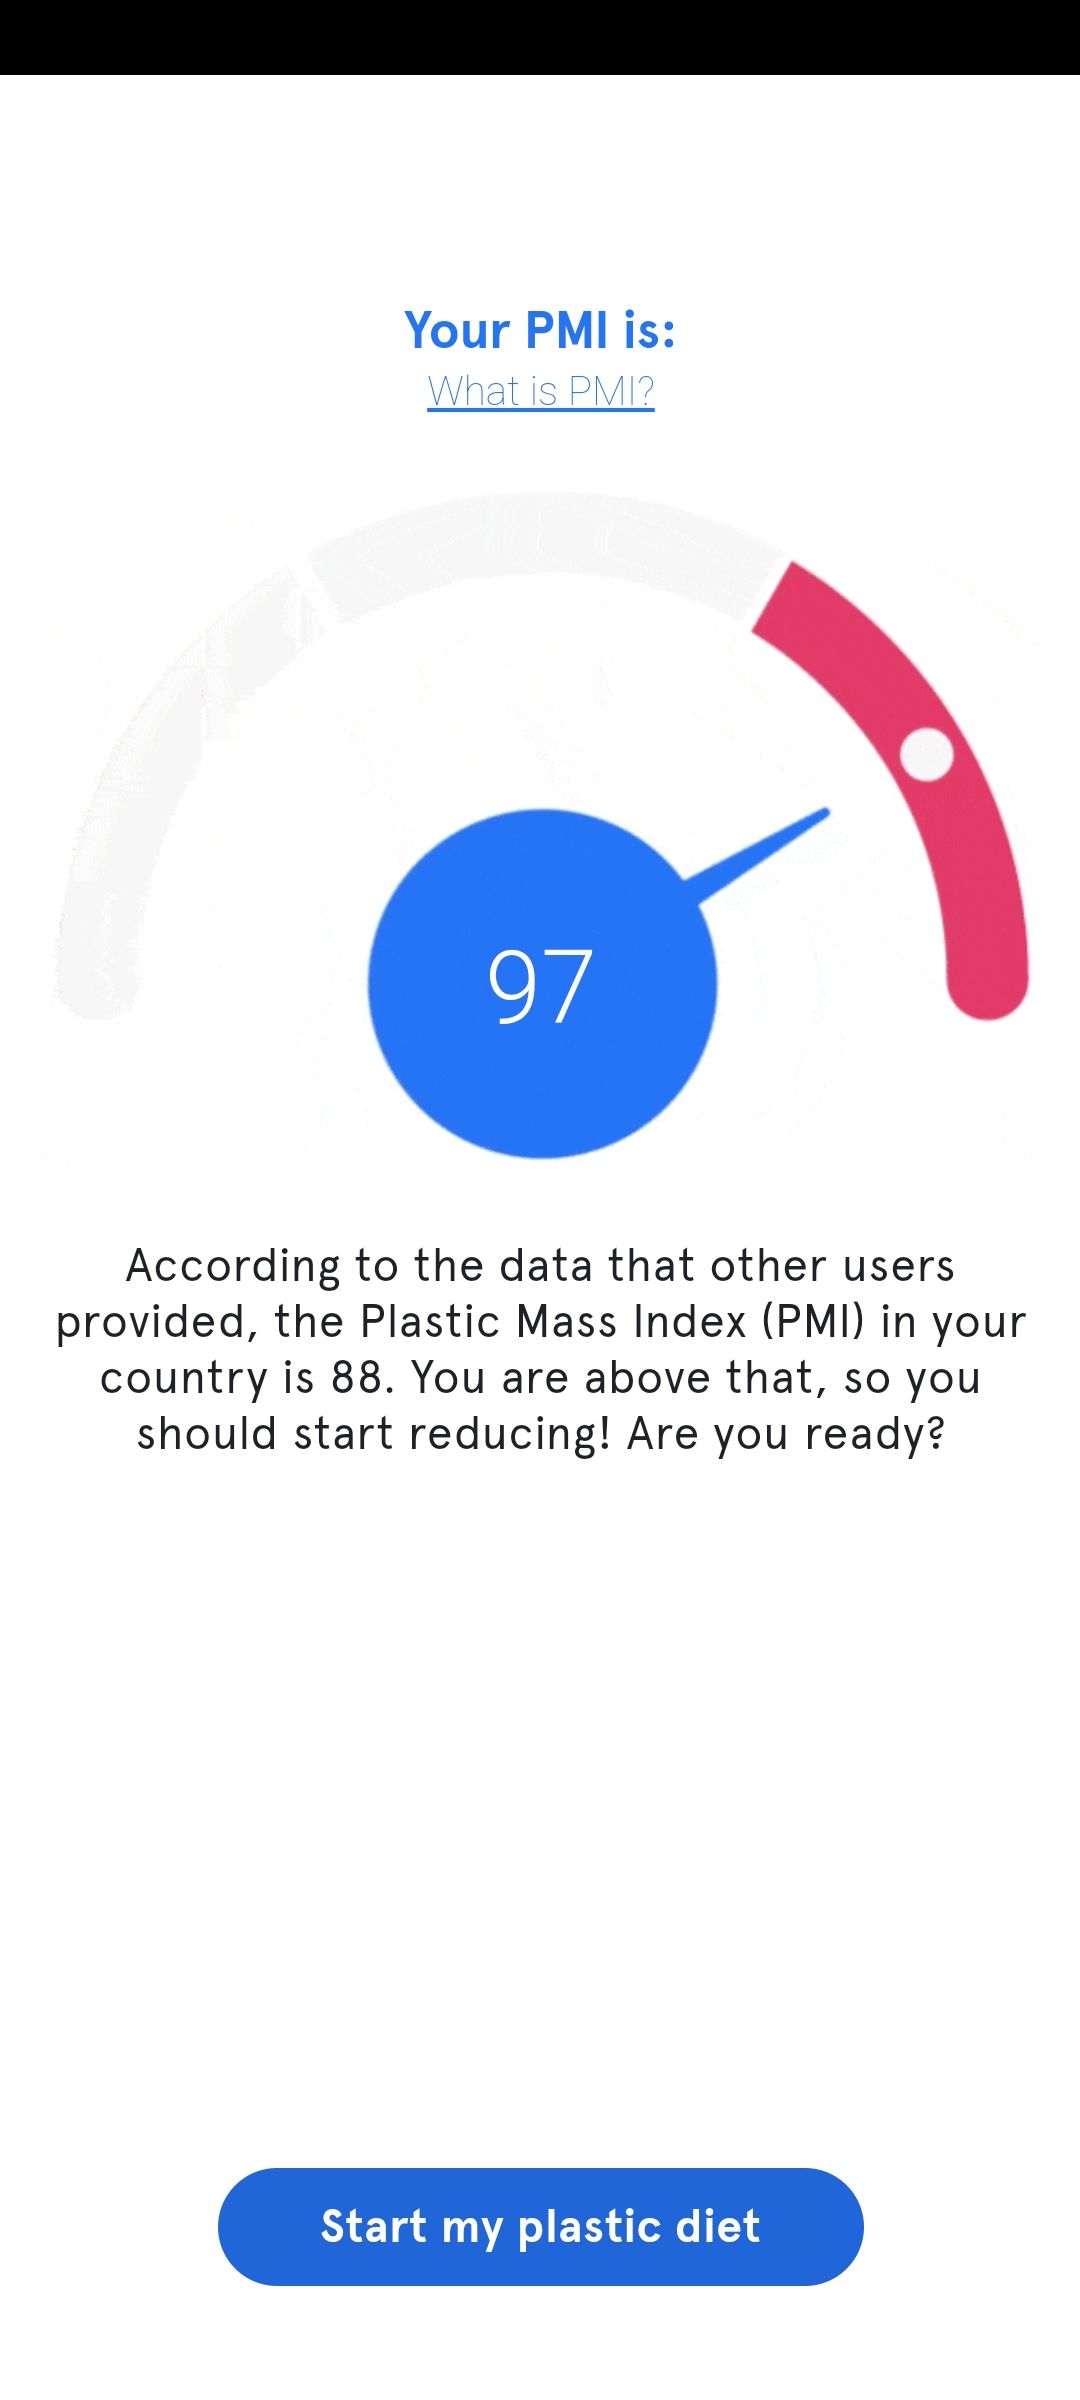 my little plastic footprint app PMI, or plastic mass index, score compared to your country's score